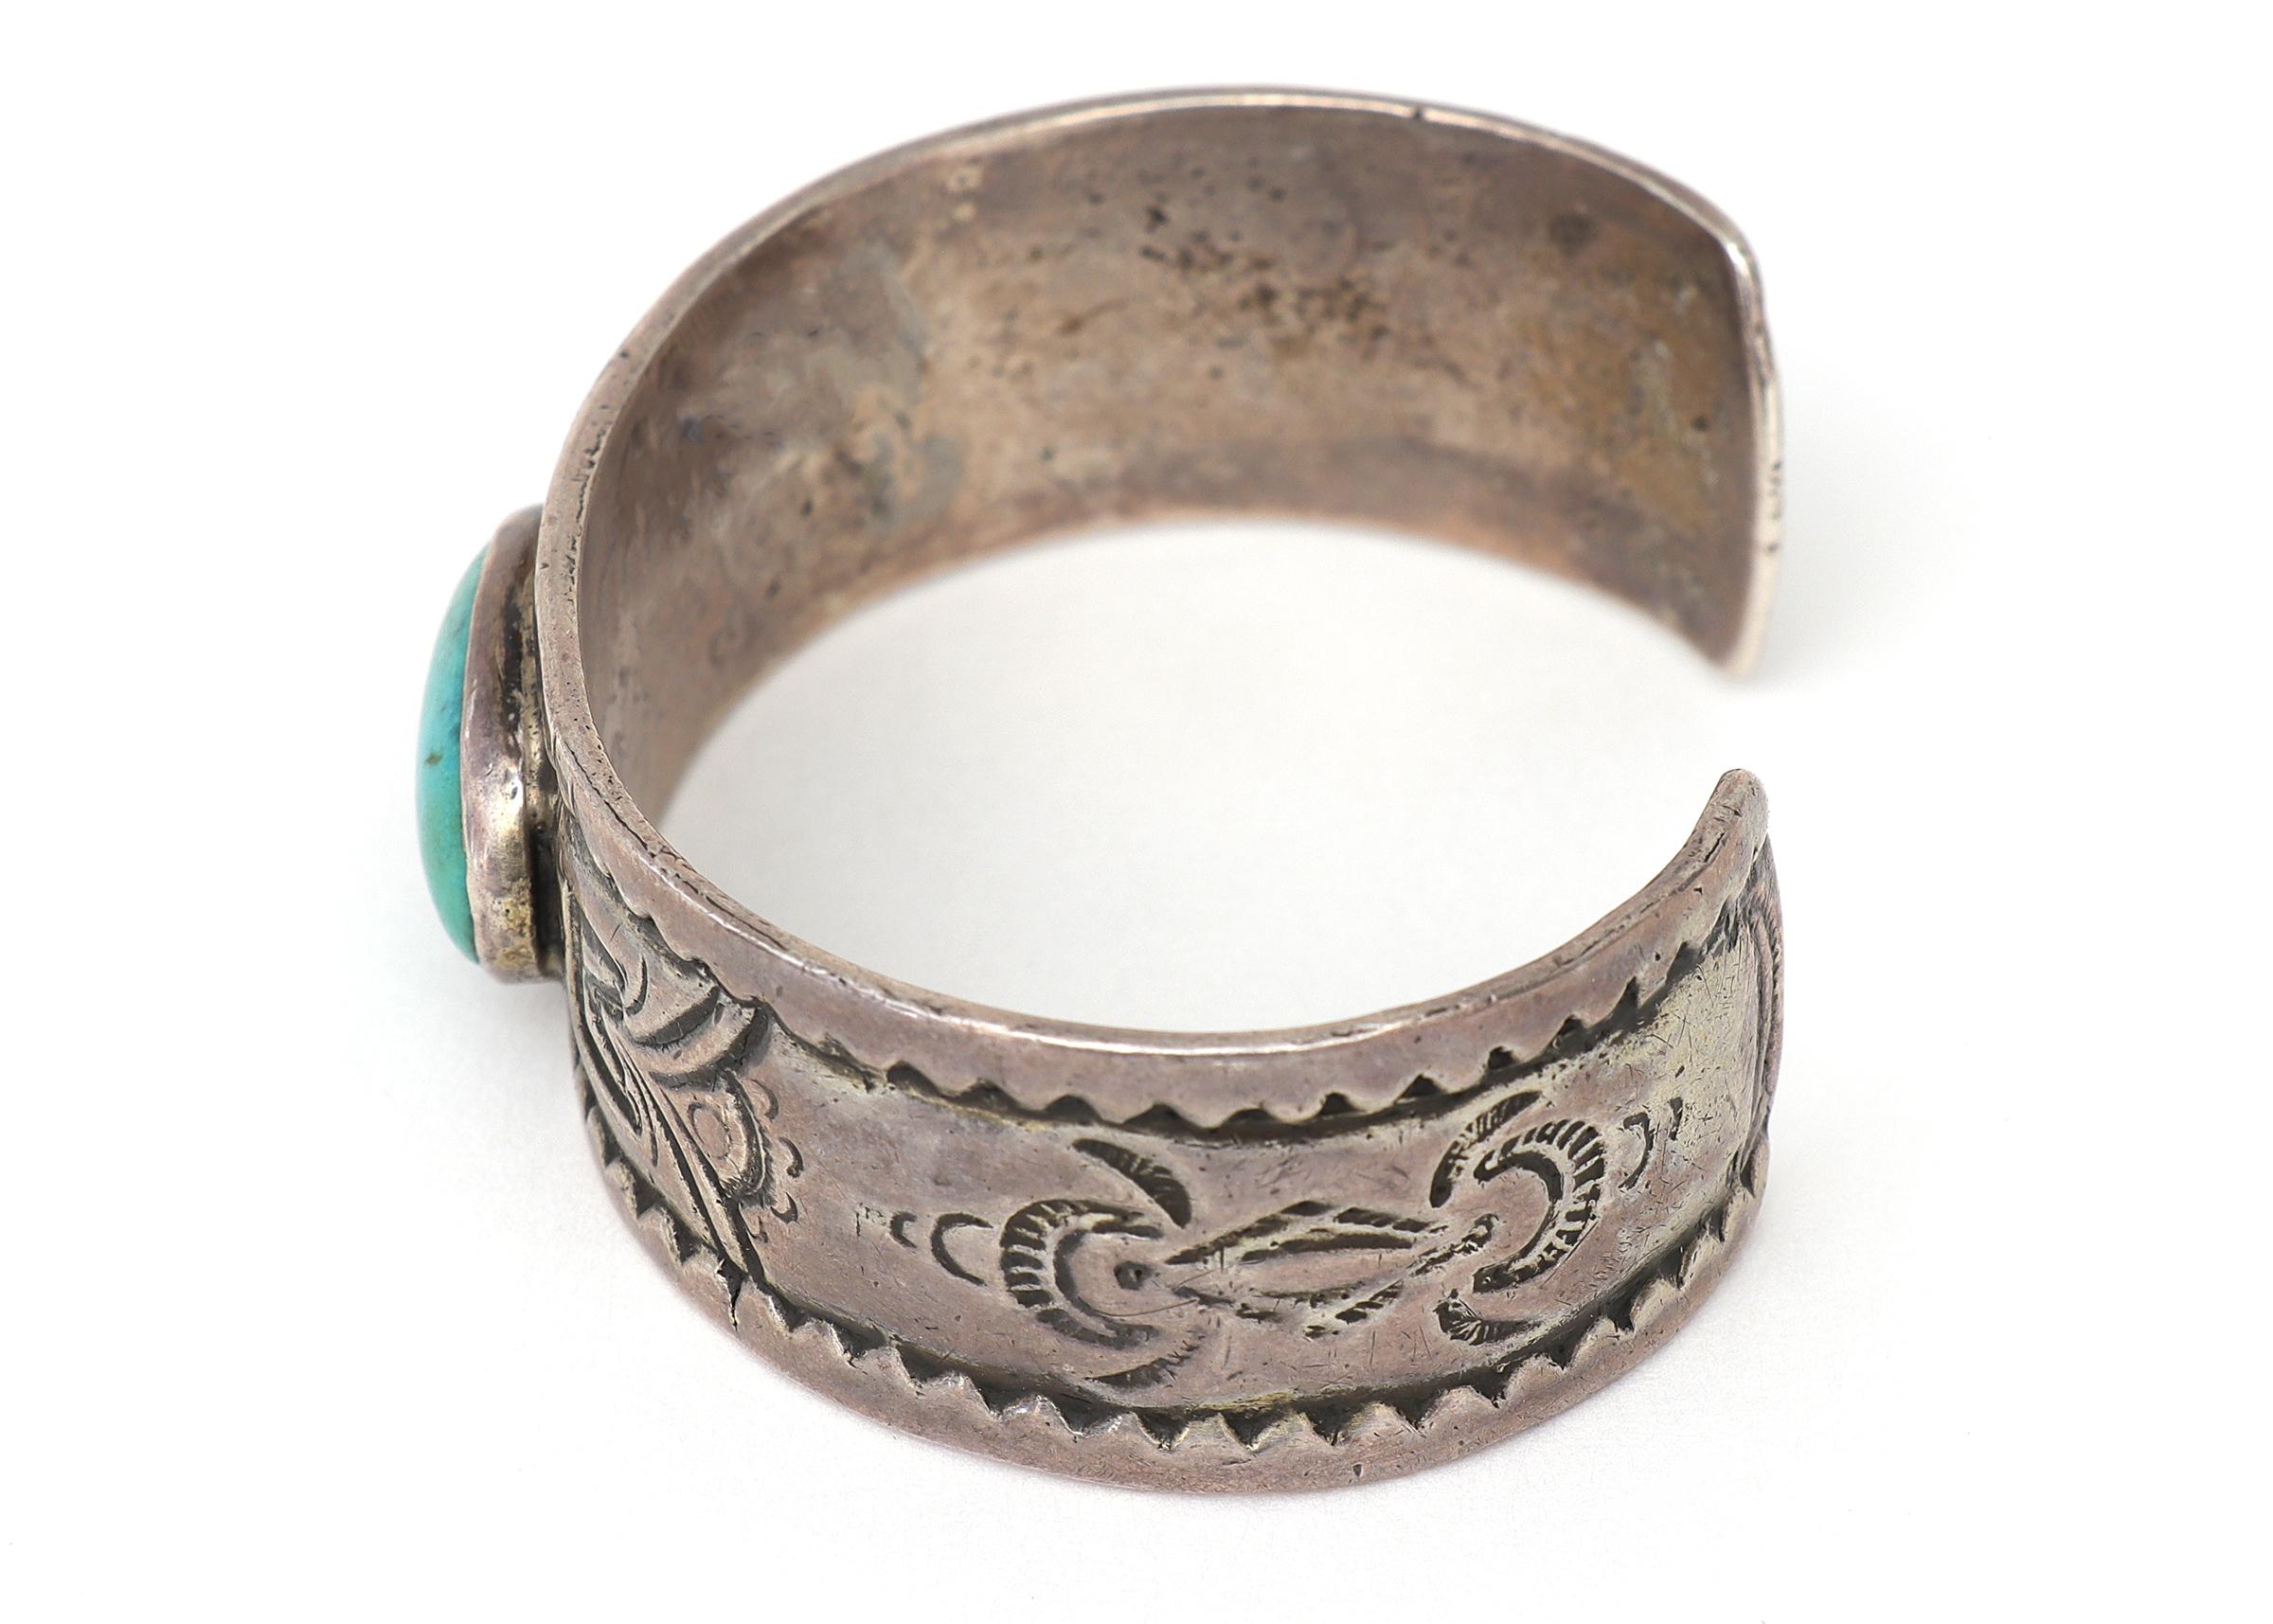 Vintage Pueblo Native American Old Pawn Ingot Silver Bracelet, Turquoise c. 1915 In Good Condition For Sale In Denver, CO